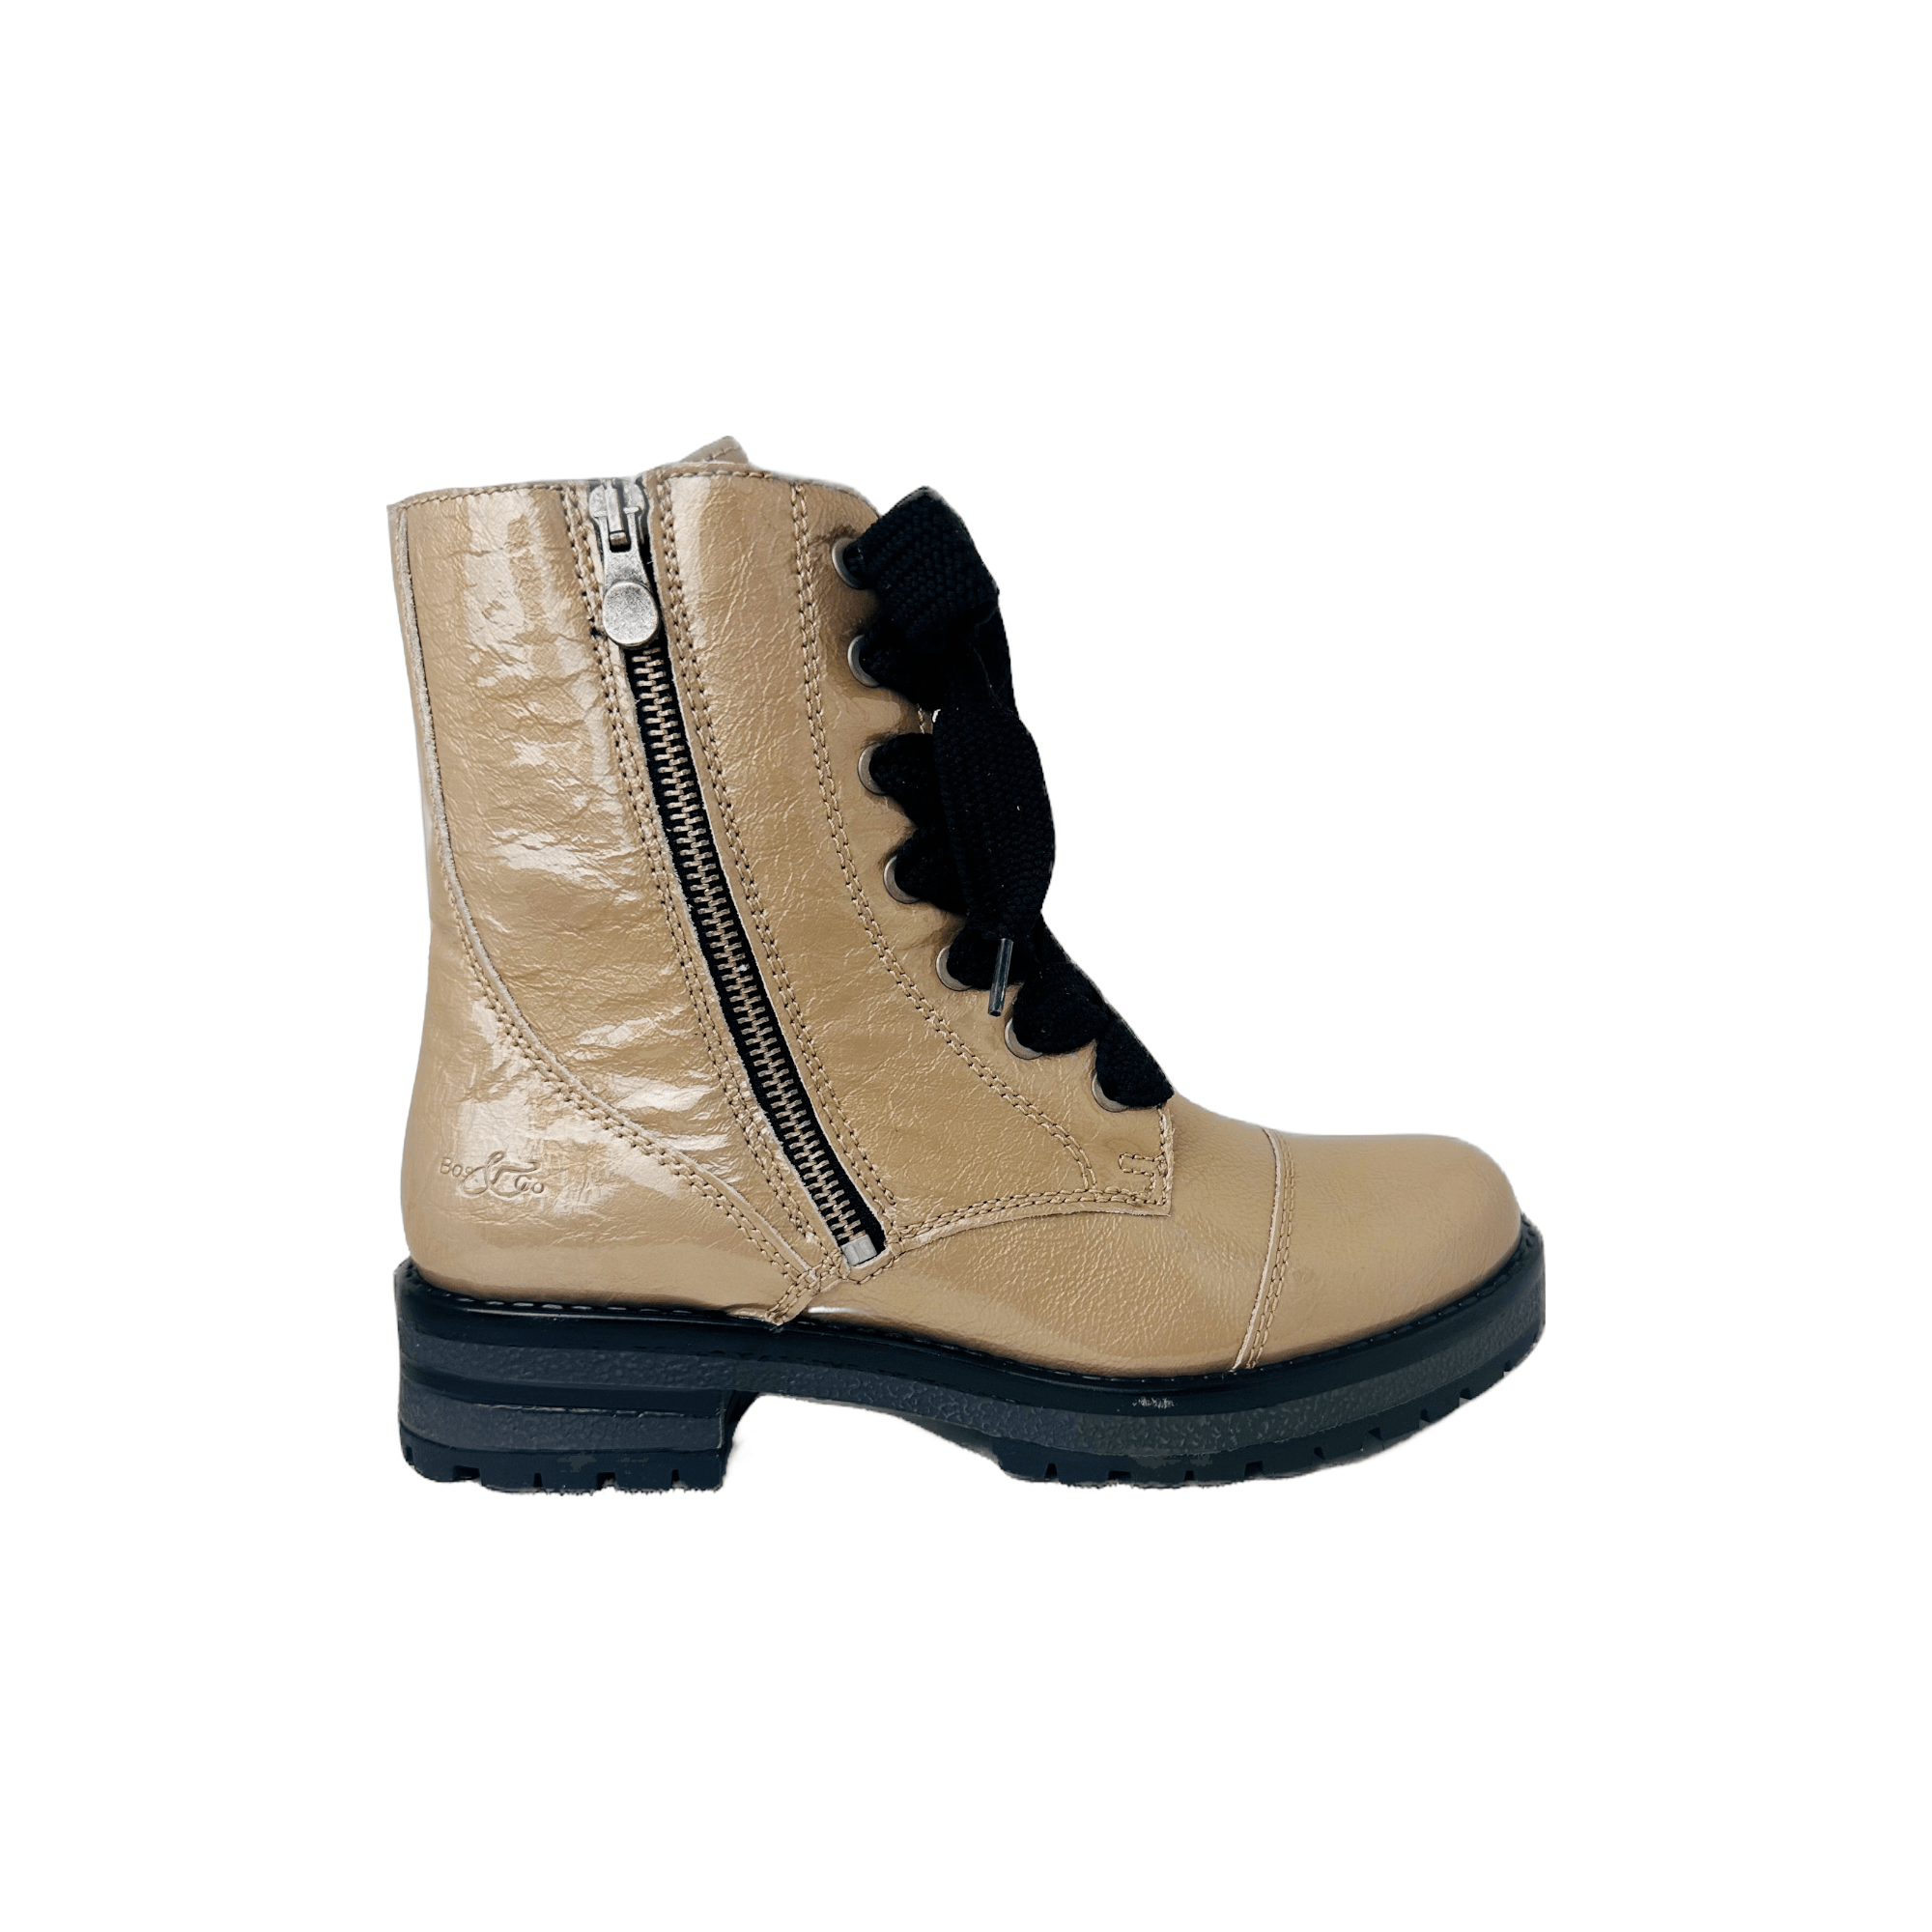 Bos & Co Boots 6 / paulie-taupe / 1.25 inches Paulie-Taupe